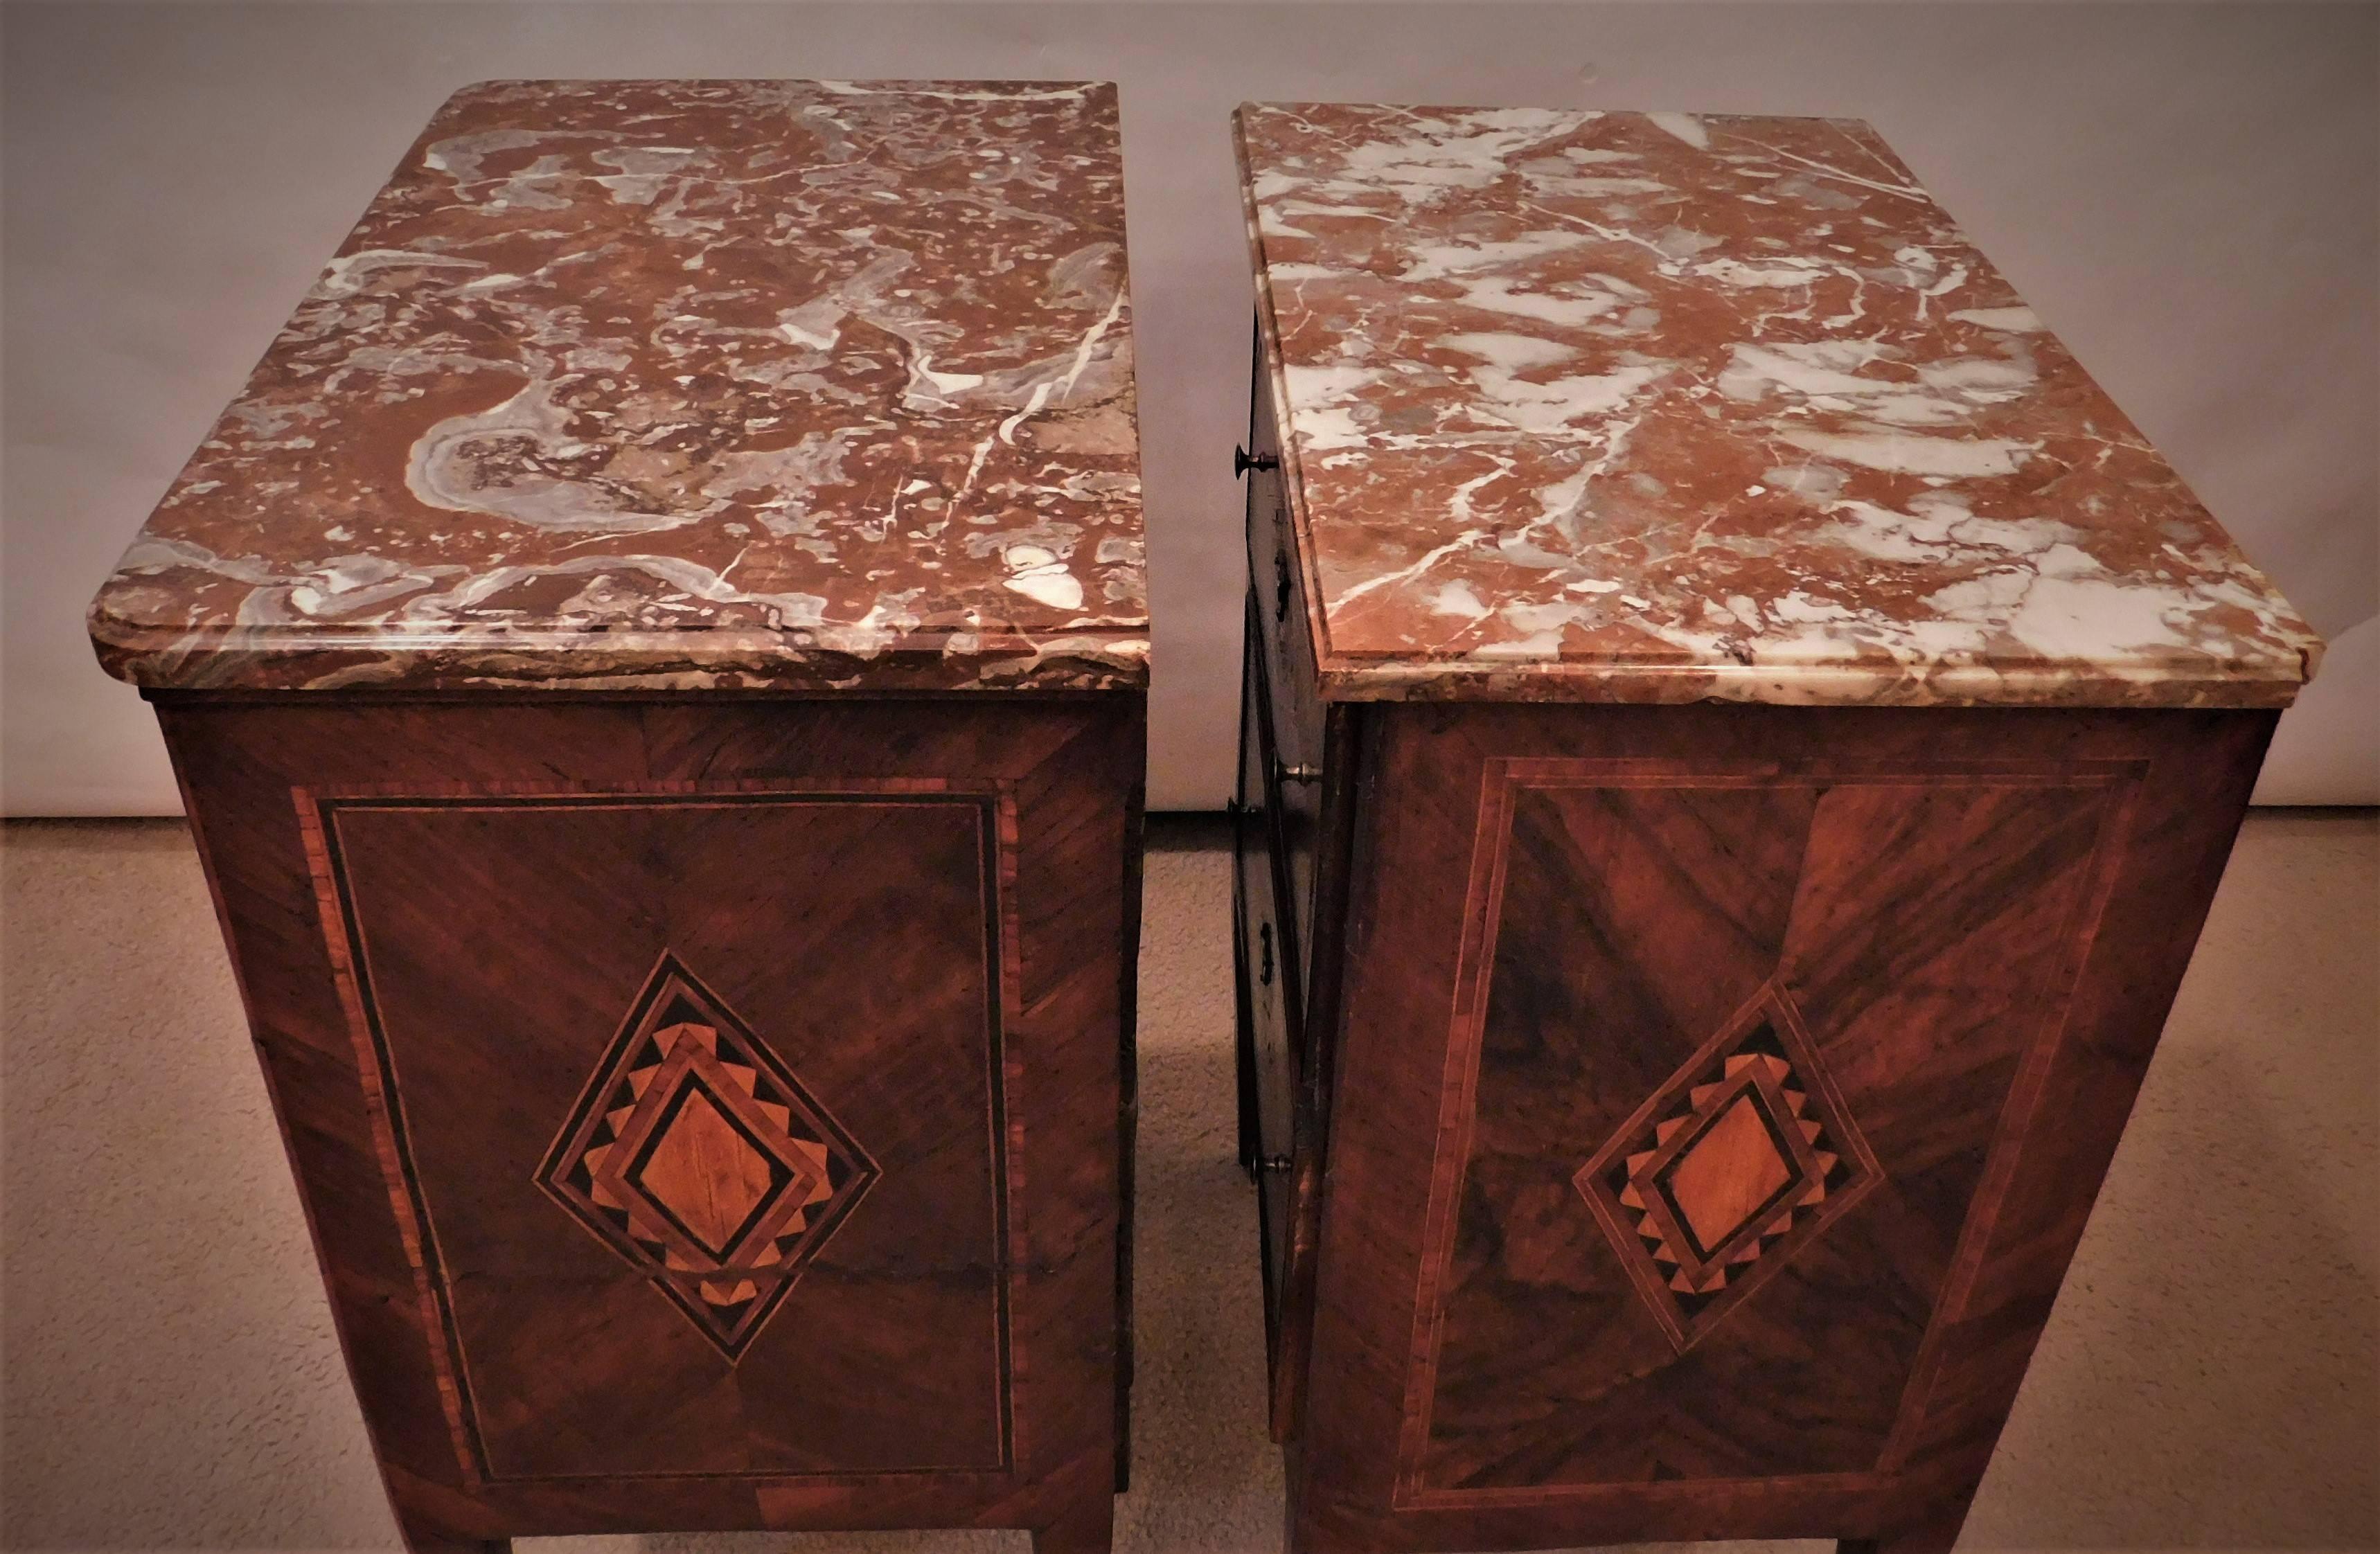 Assembled Pair of Italian Neoclassical Marble-Top Small Commodes, circa 1810 For Sale 3